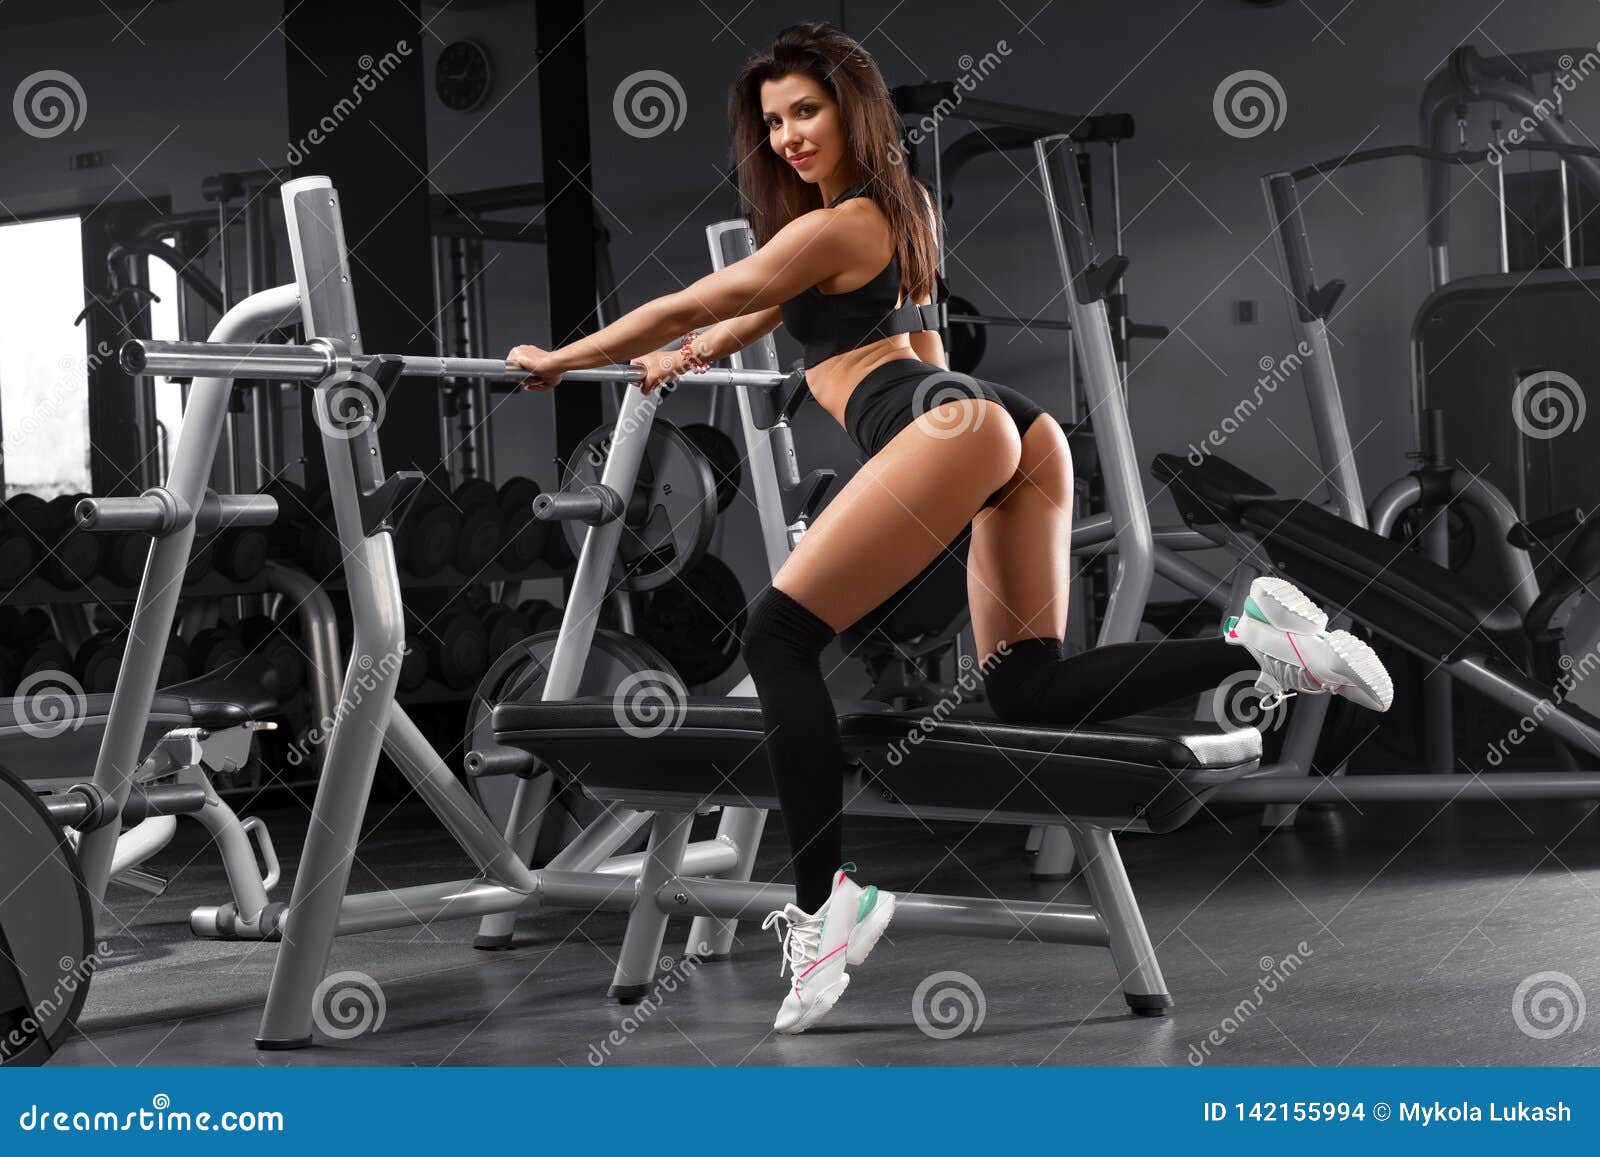 Athletic Girl Working Out in Gym. Buttocks in Thong Stock Photo - Image of  attractive, athletic: 142155994